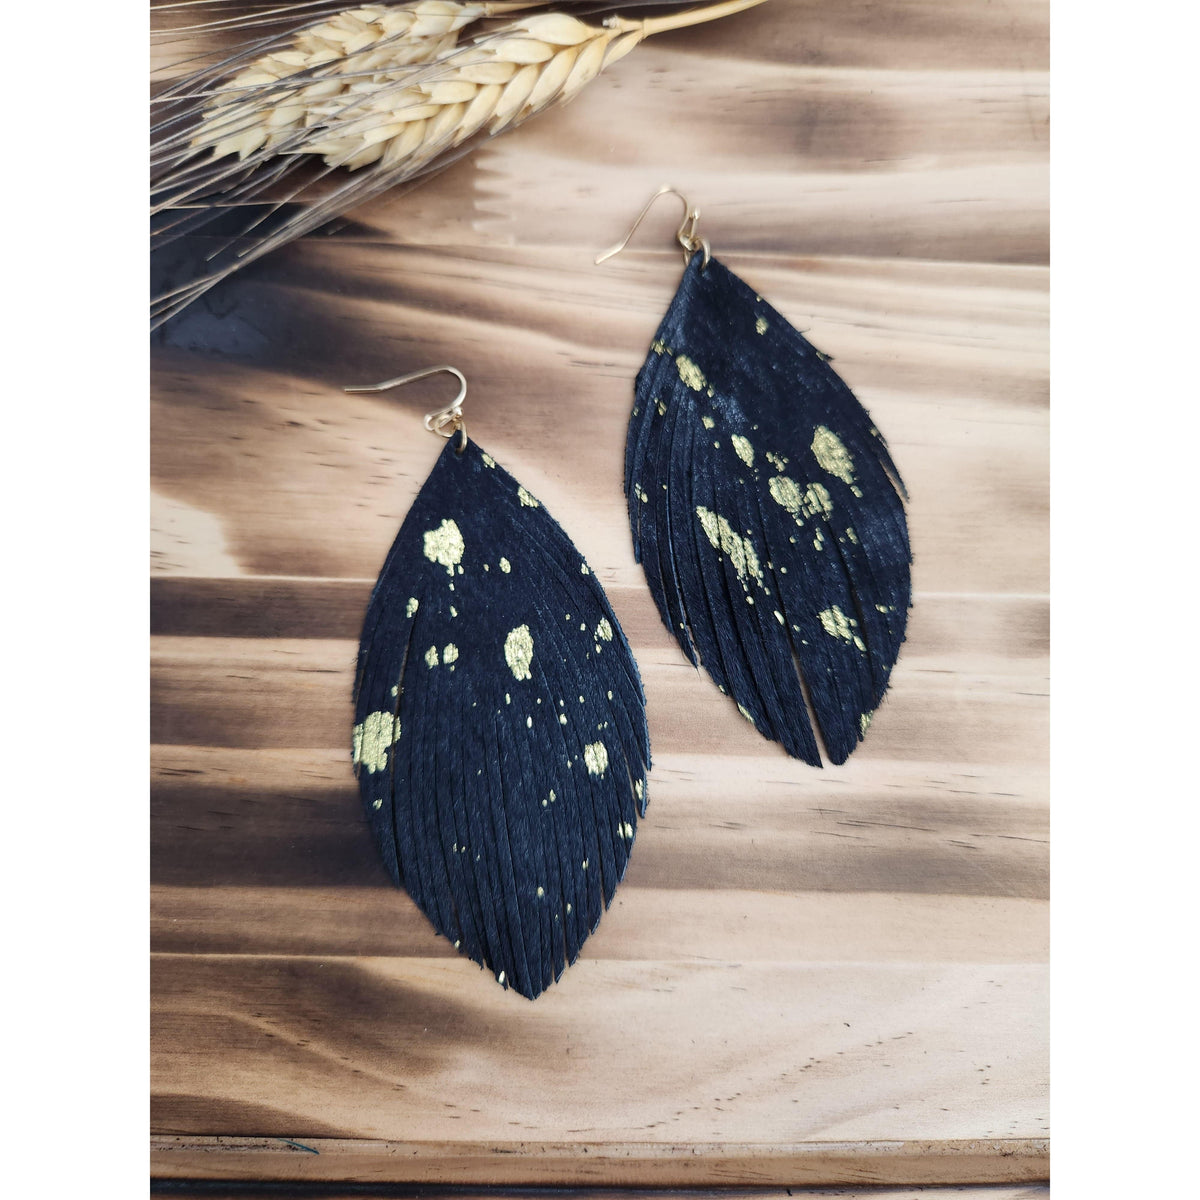 Giddy Up Black and Gold Leather Fringe Earrings Earrings TheFringeCultureCollective